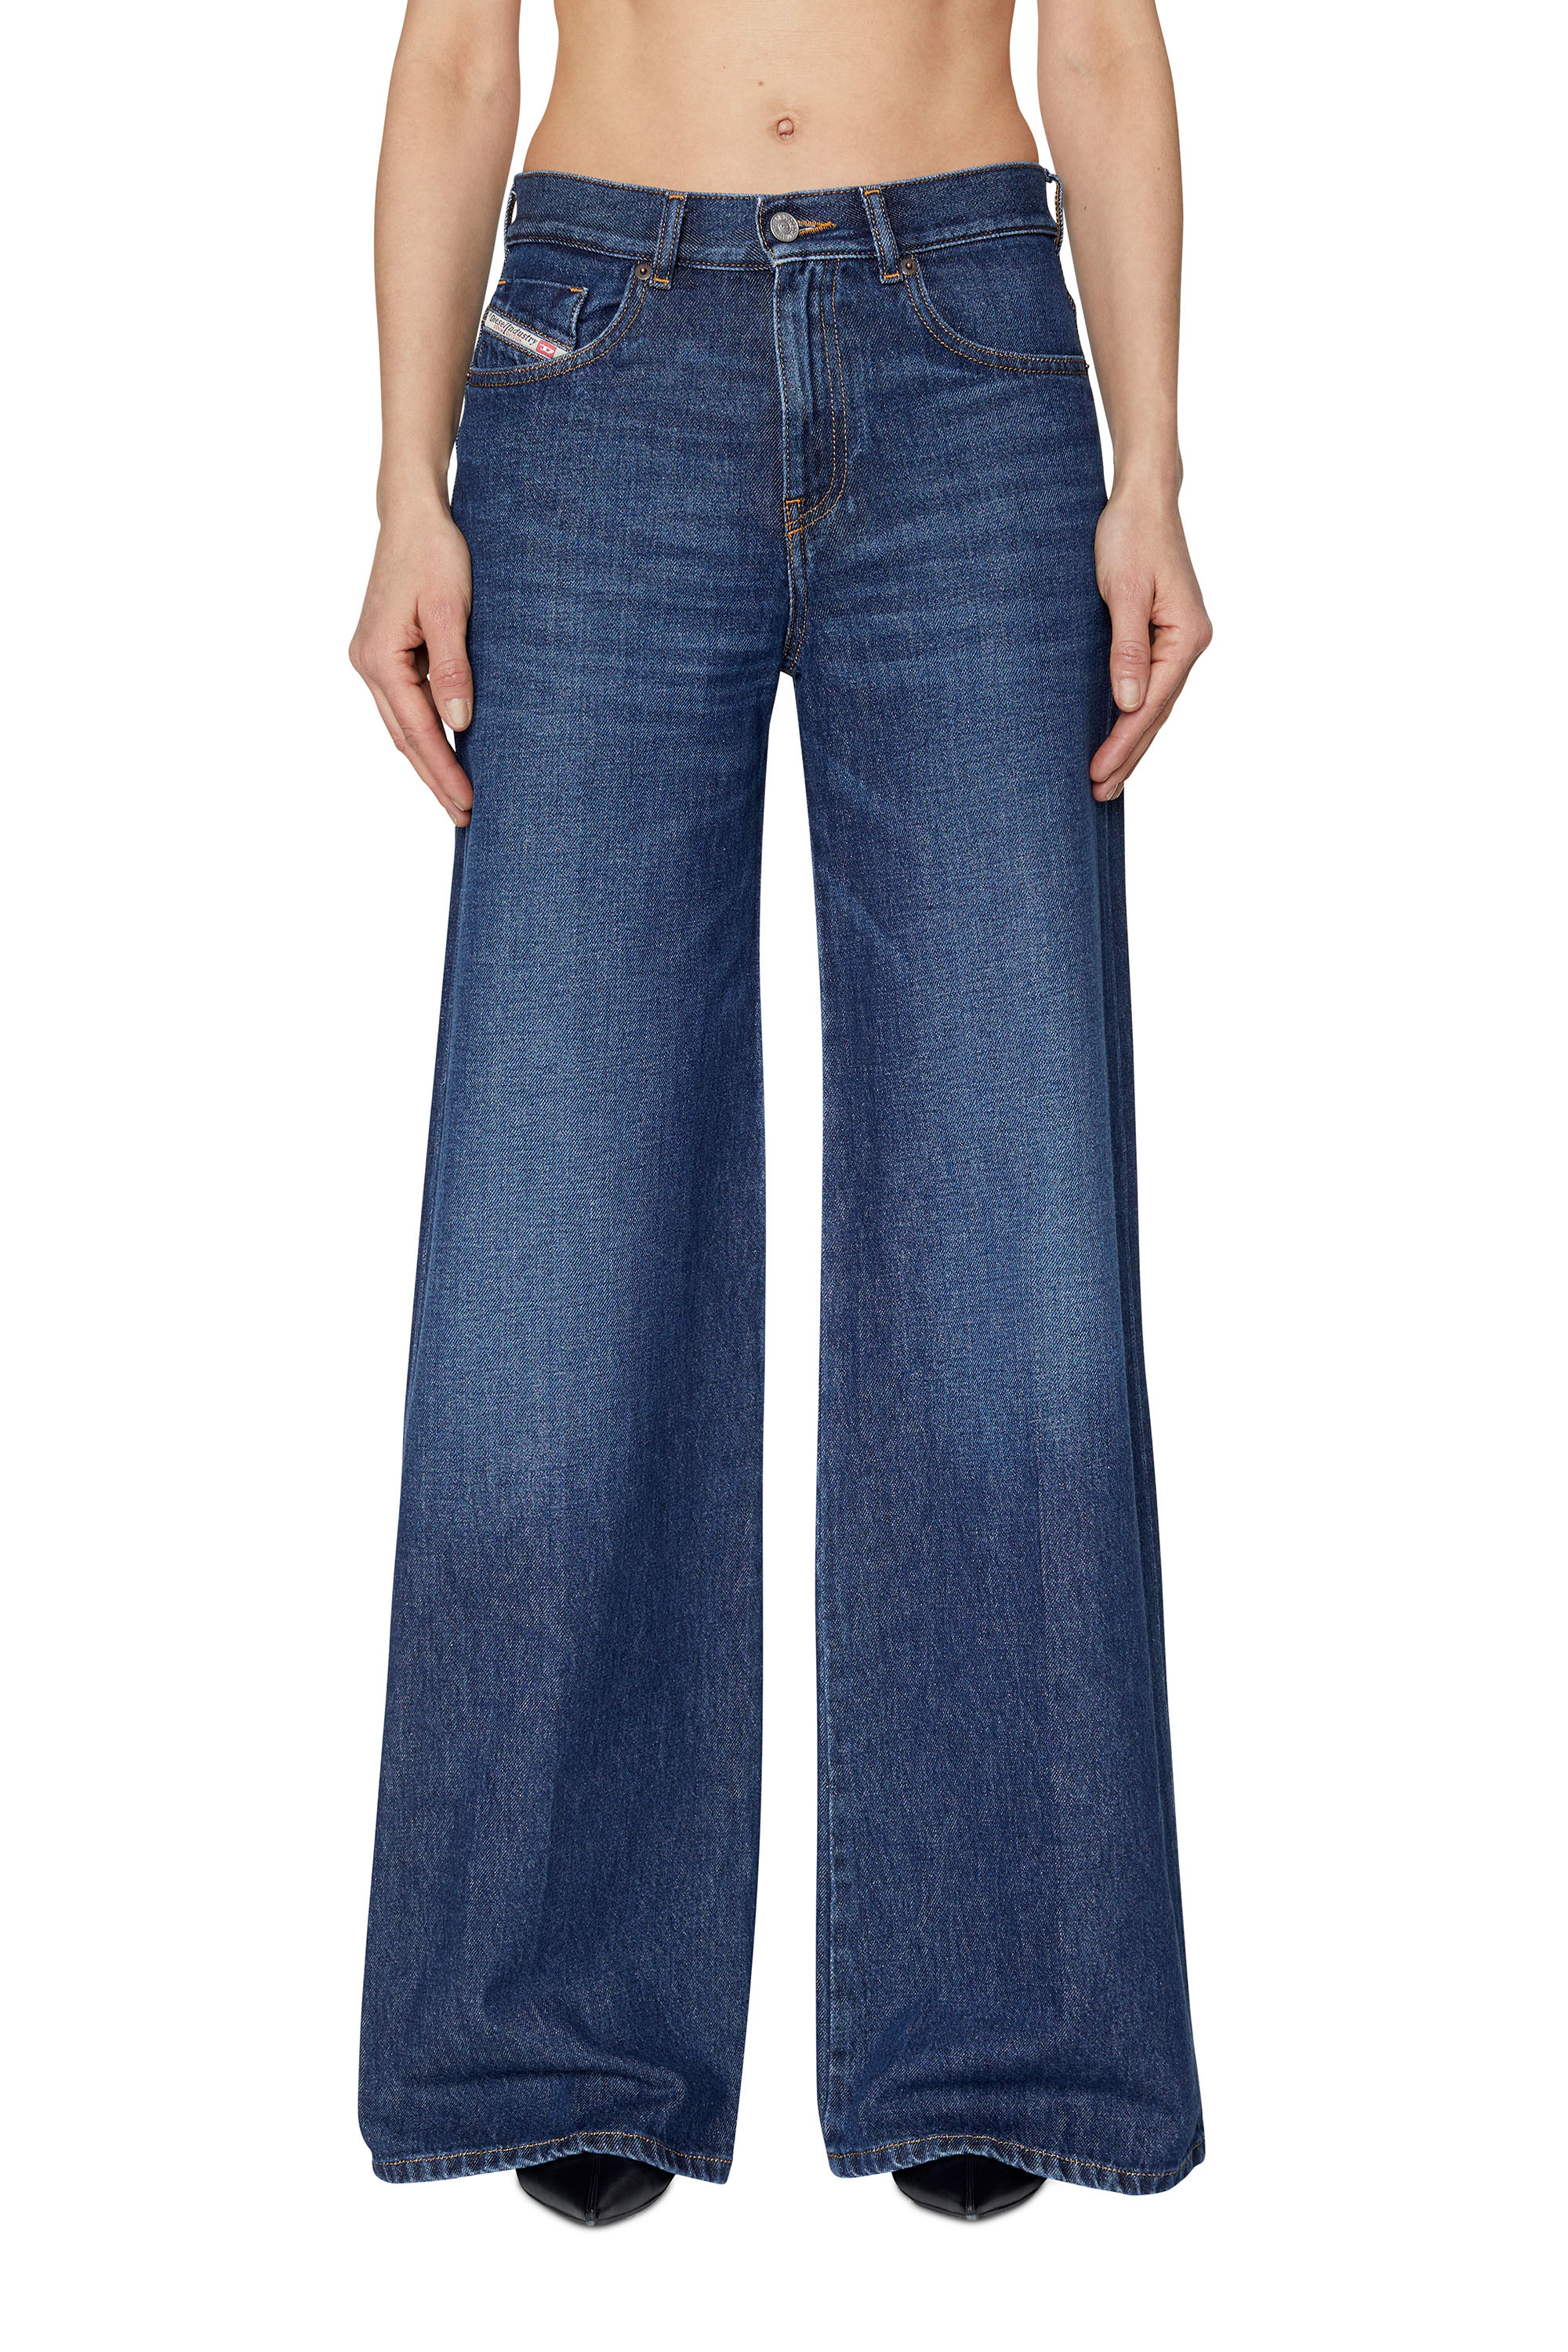 Bootcut and Flare Jeans 1978 D-Akemi 09C03, Azul Oscuro - Vaqueros